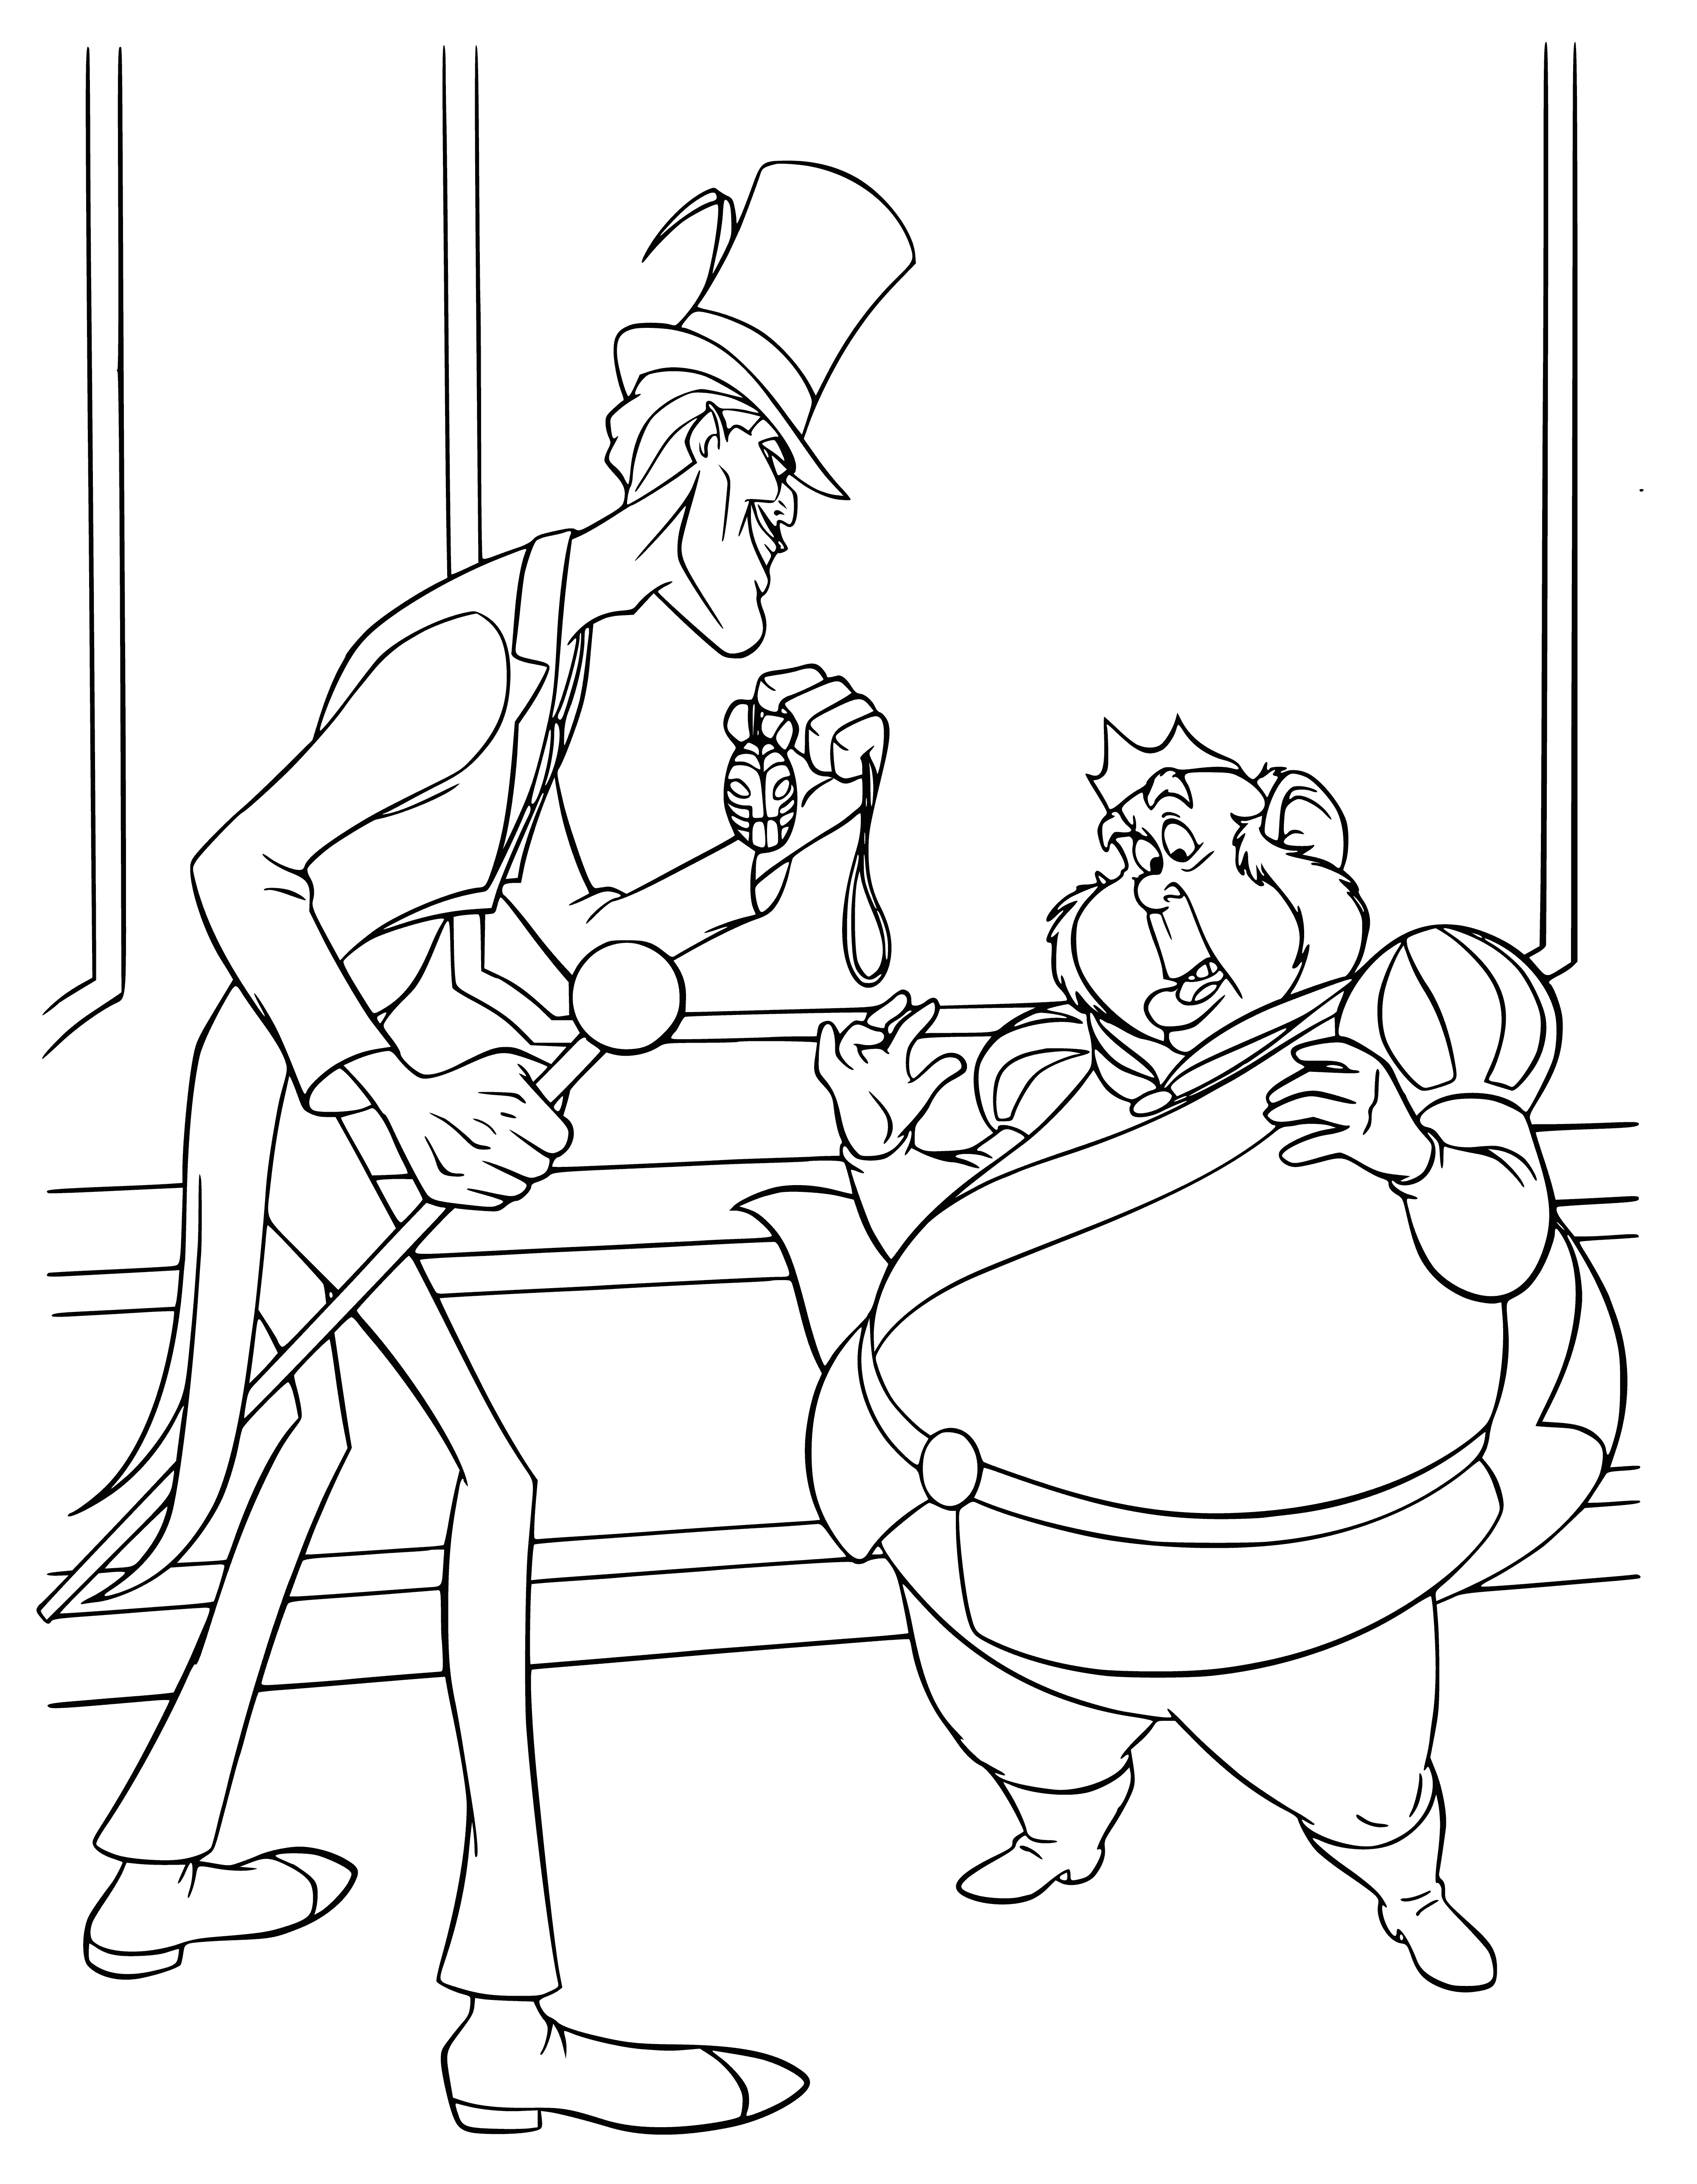 coloring page: Prince Naveen in danger! Both a large alligator and a purple voodoo frog menace him on a coloring page.